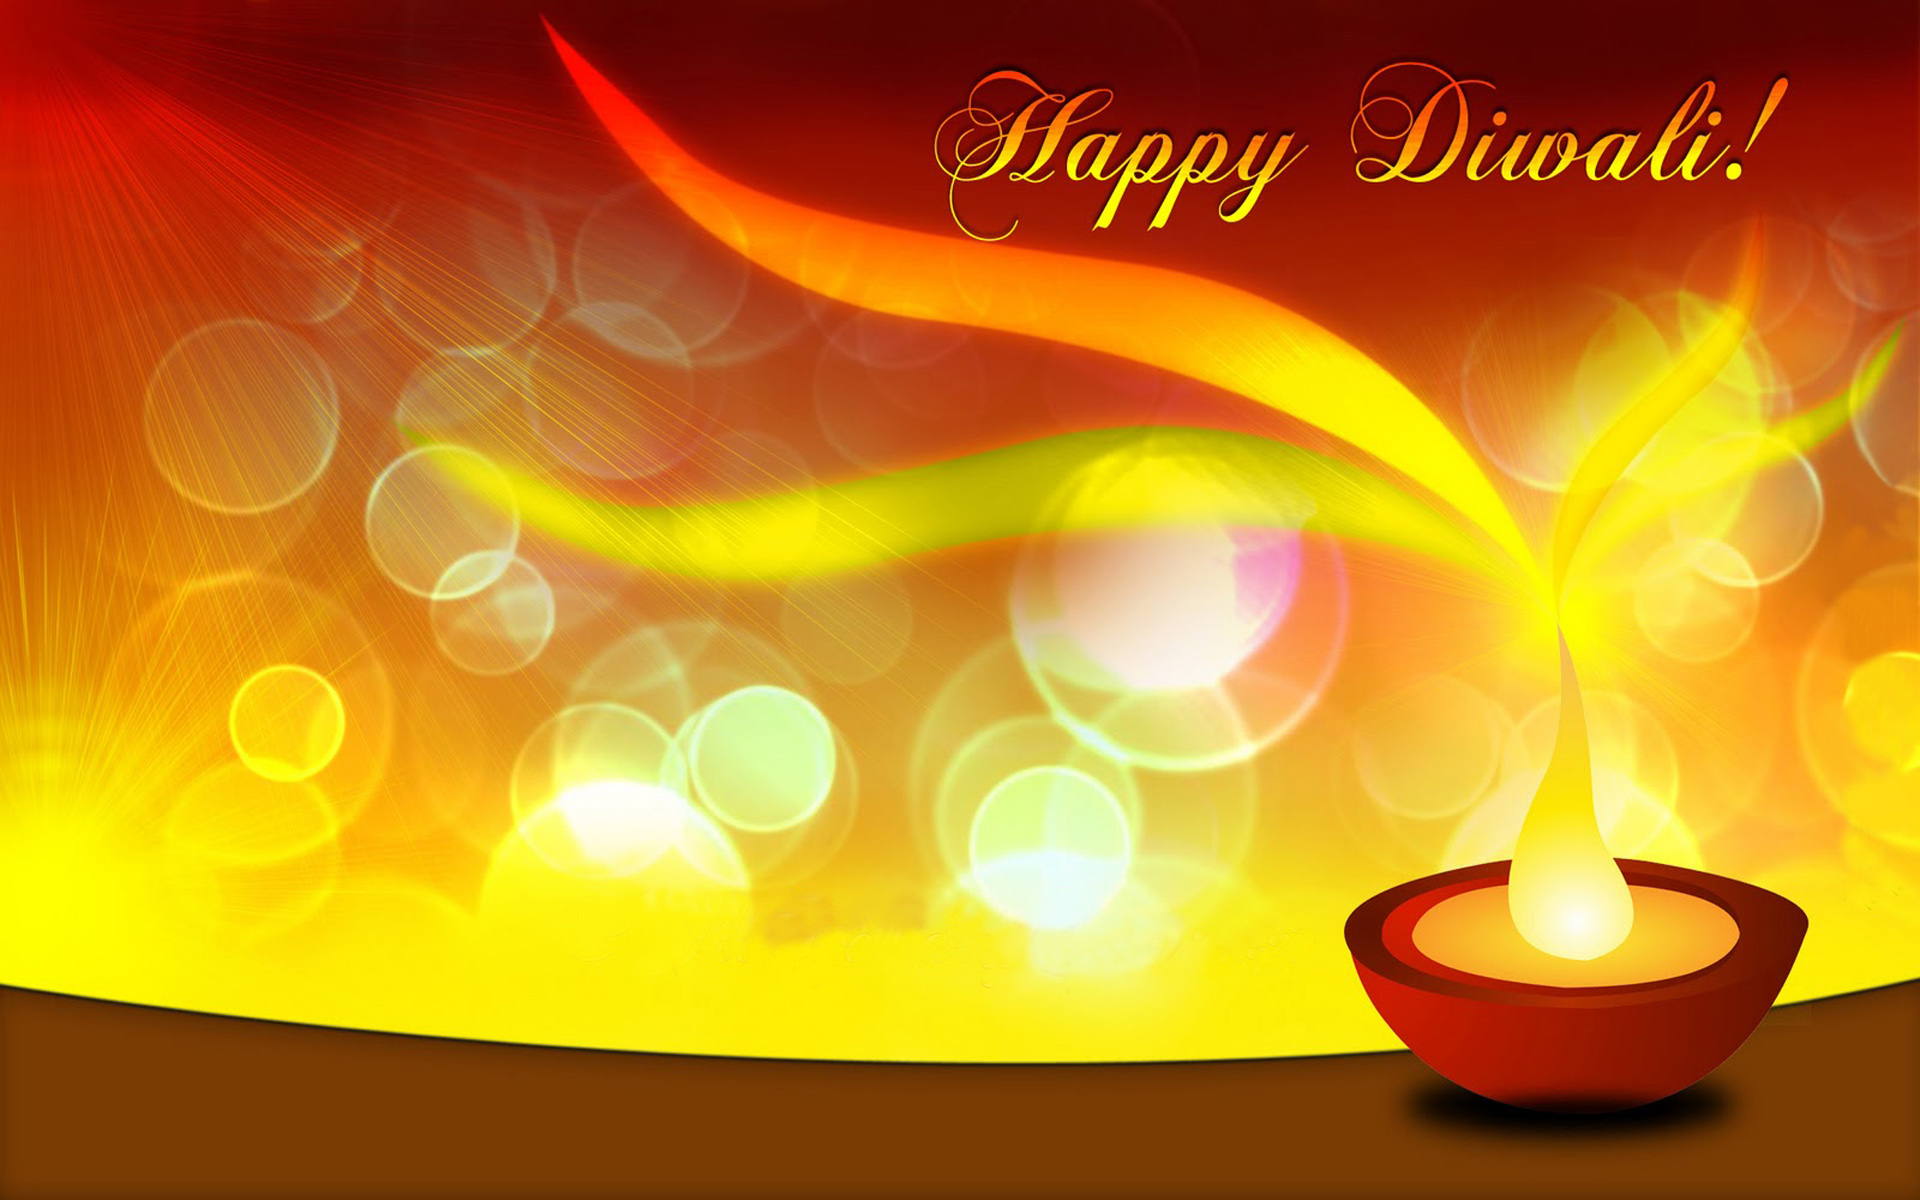 Happy Diwali Religious Background For Diwali Festival With Lamp 1920x1200 :  